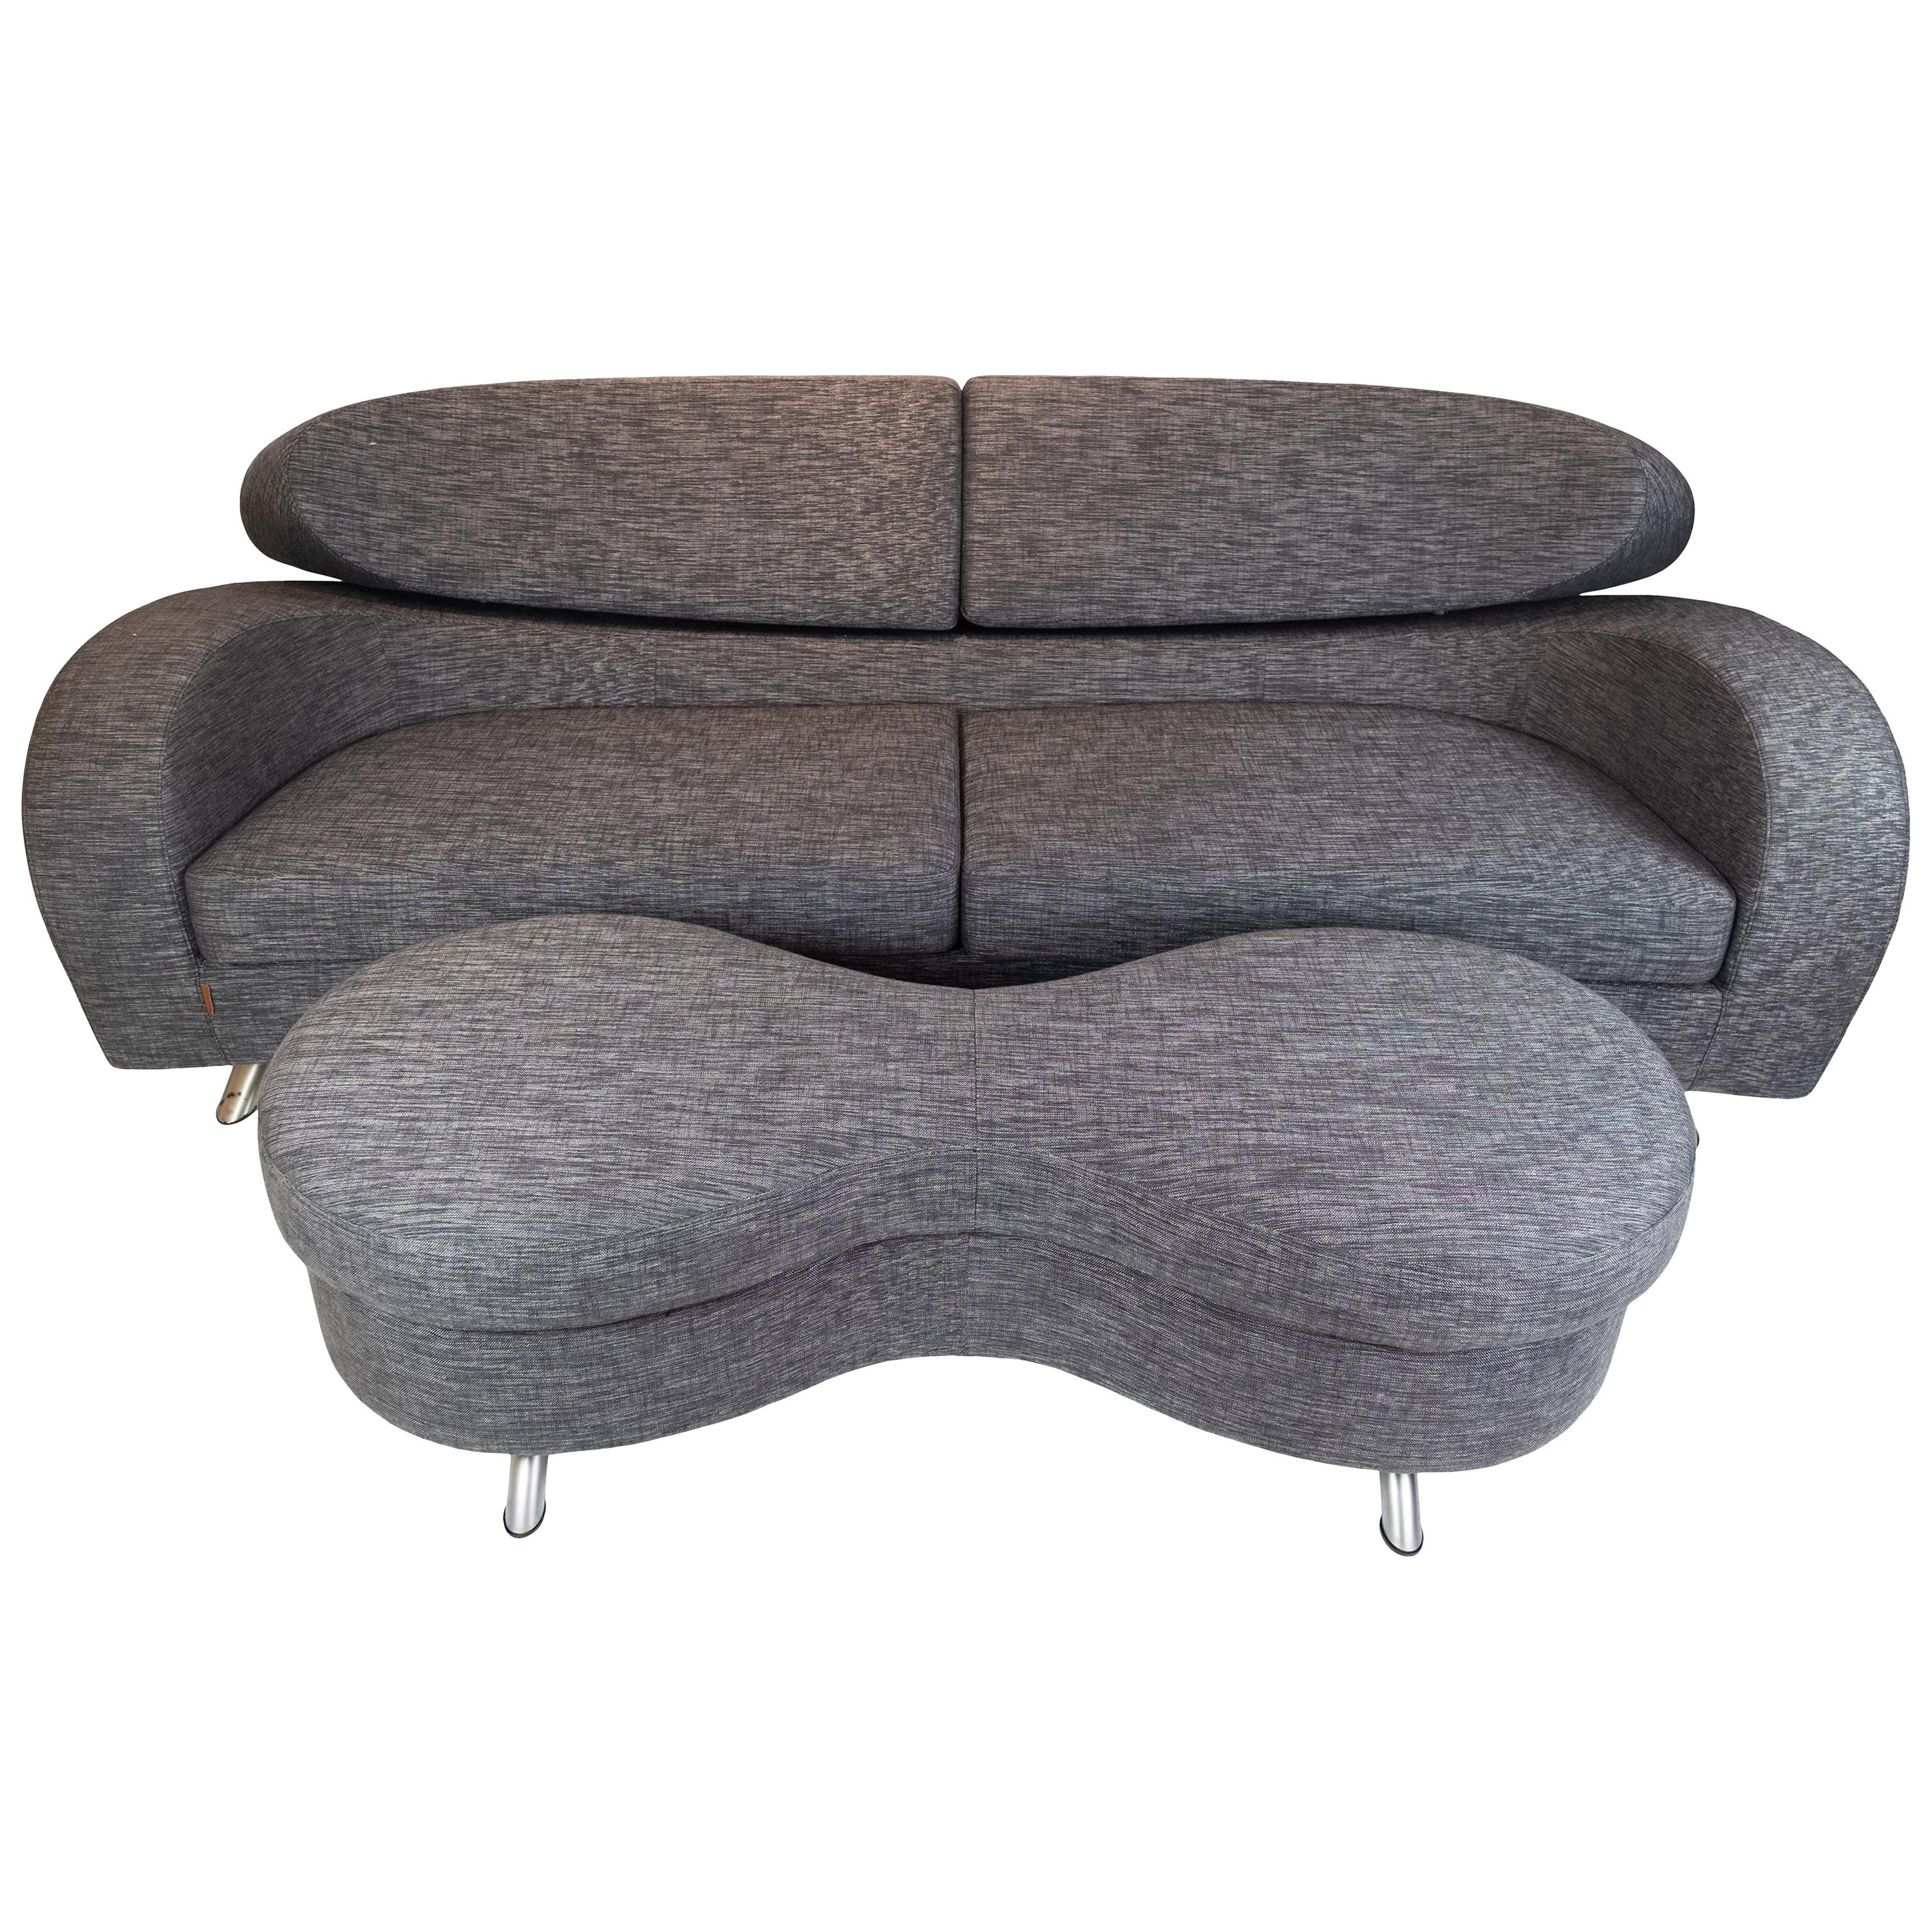 Two-Seat Sofa of Grey Wool Fabric with Stool by the Norwegian Brand Brunstad